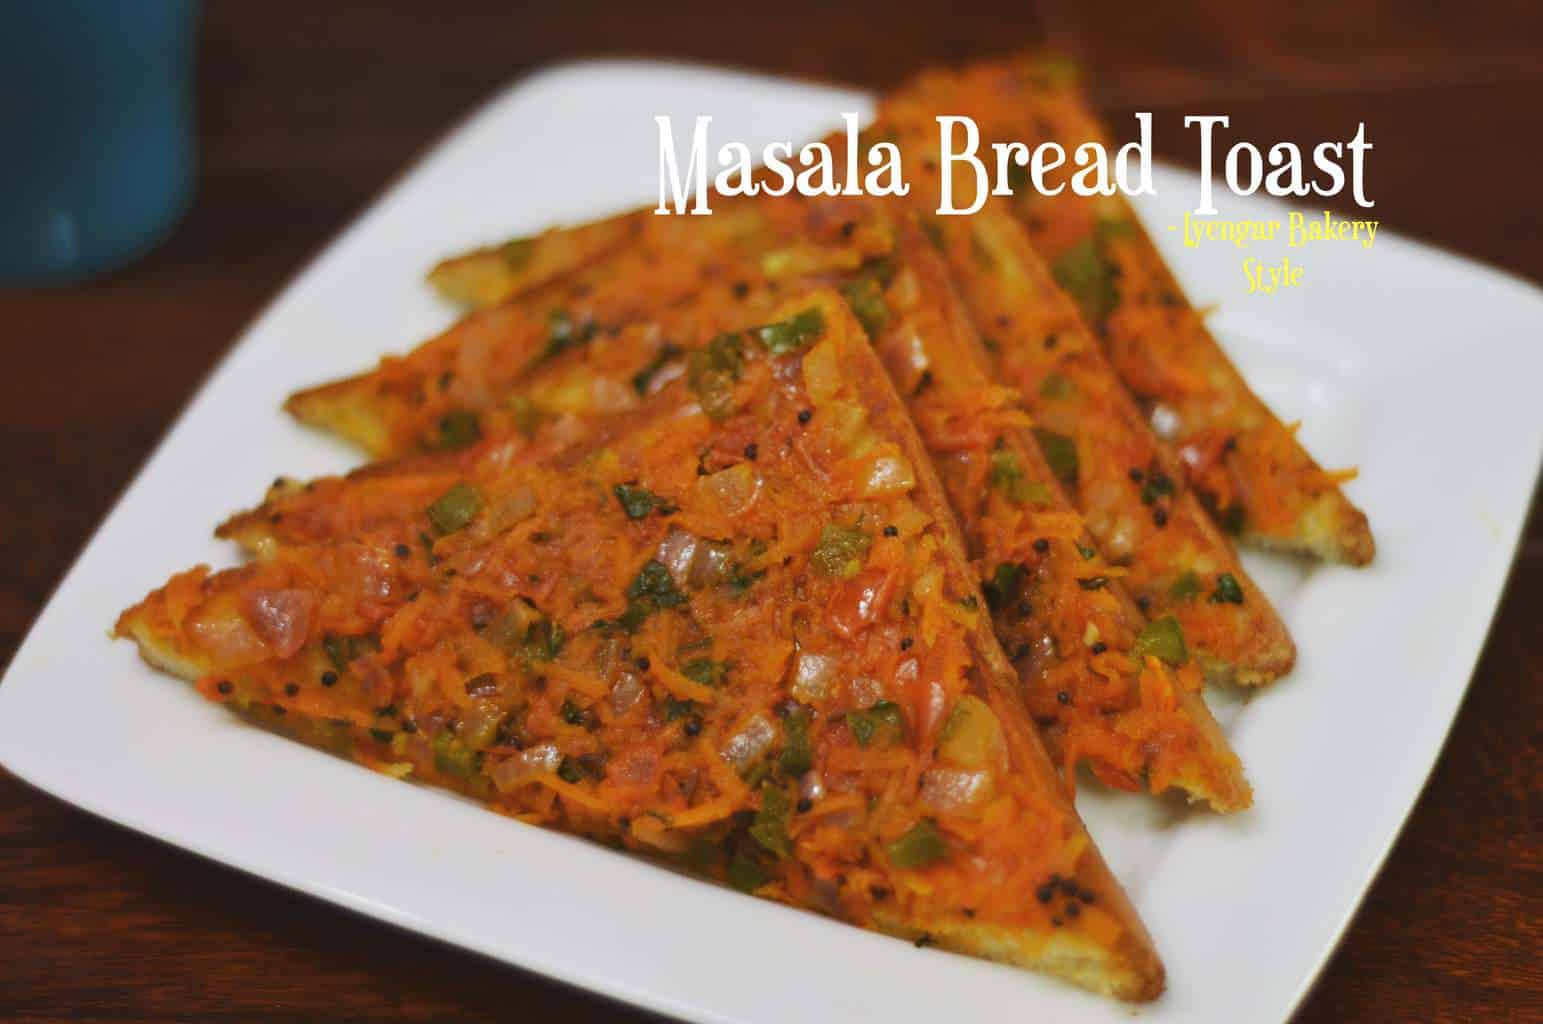 Masala Bread Toast arranged on one another in a plate